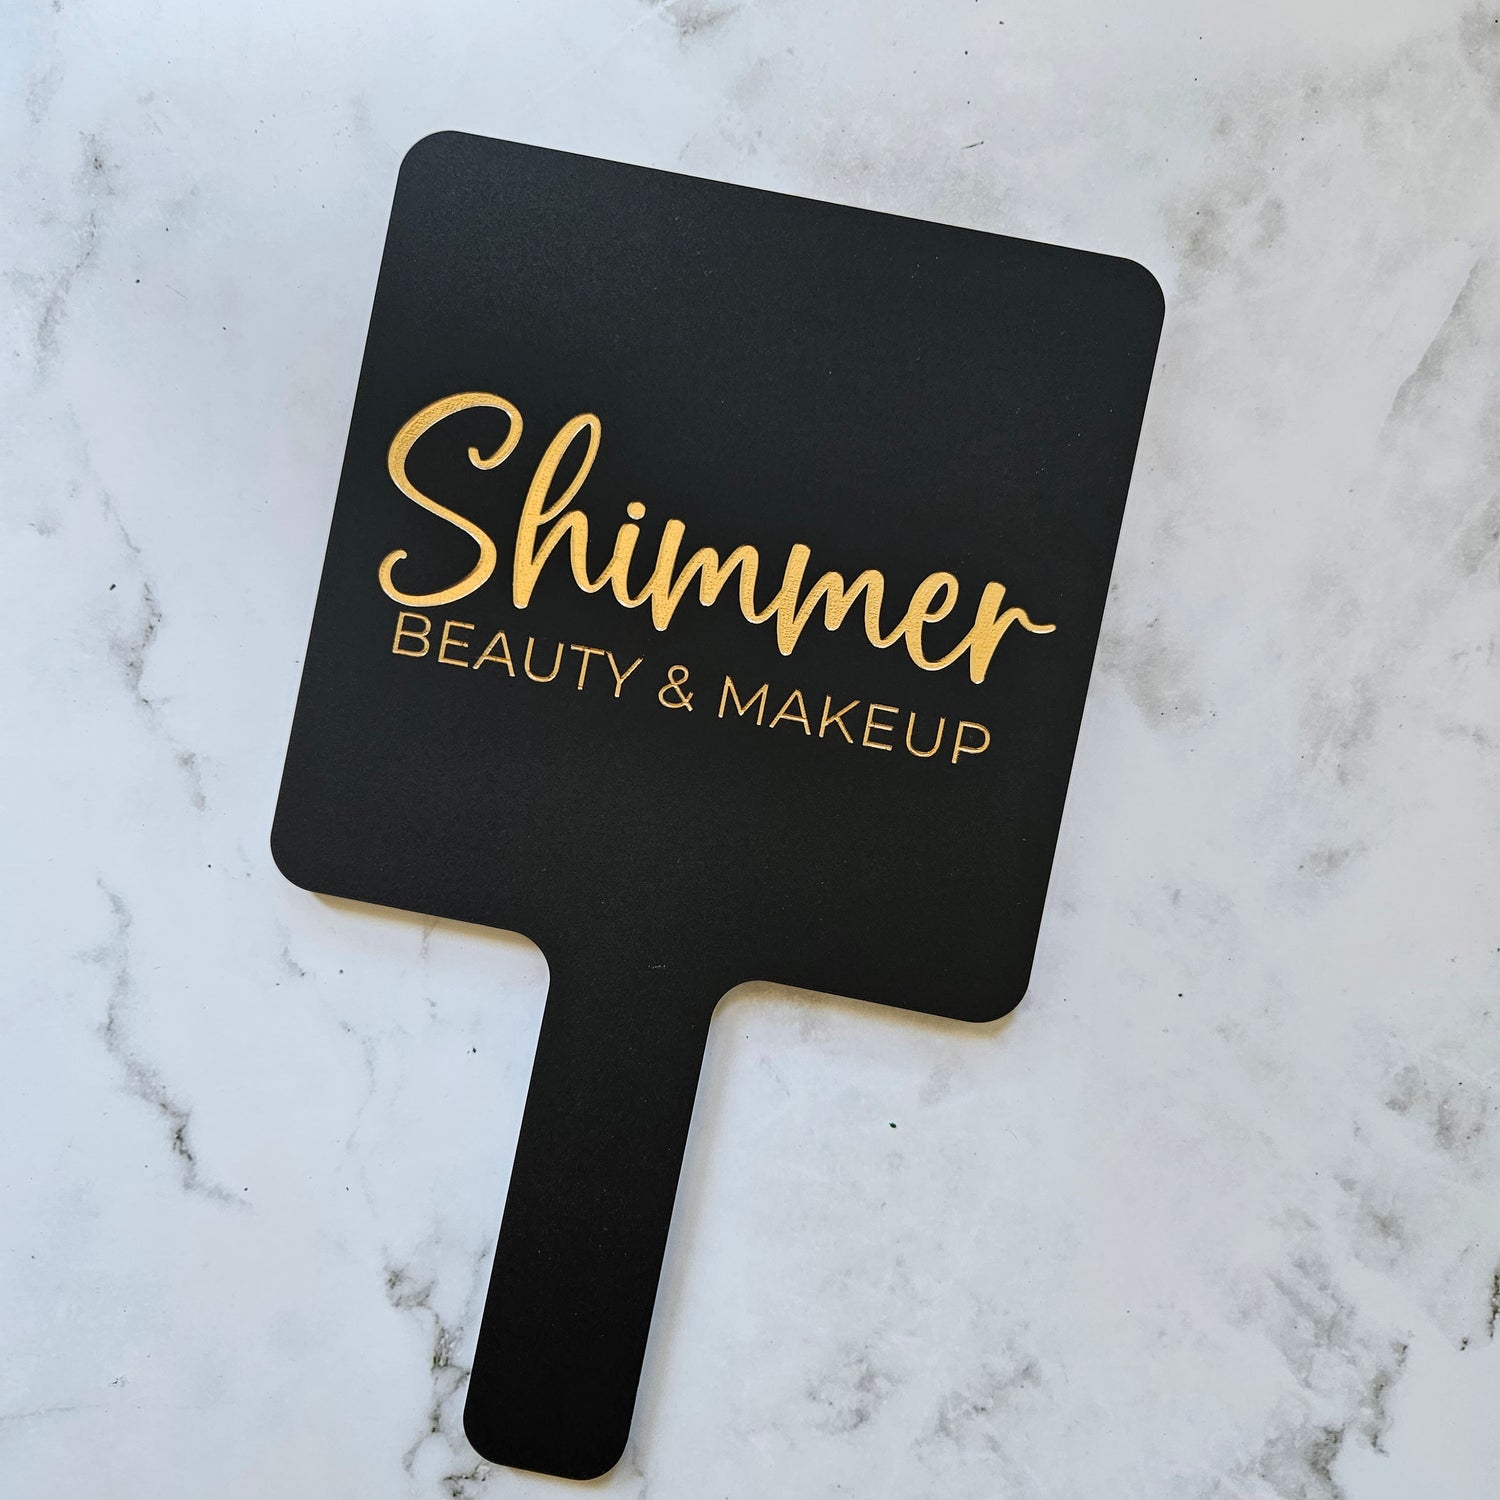 Square handheld mirror in black with gold logo engraving for beauty and makeup artist australia